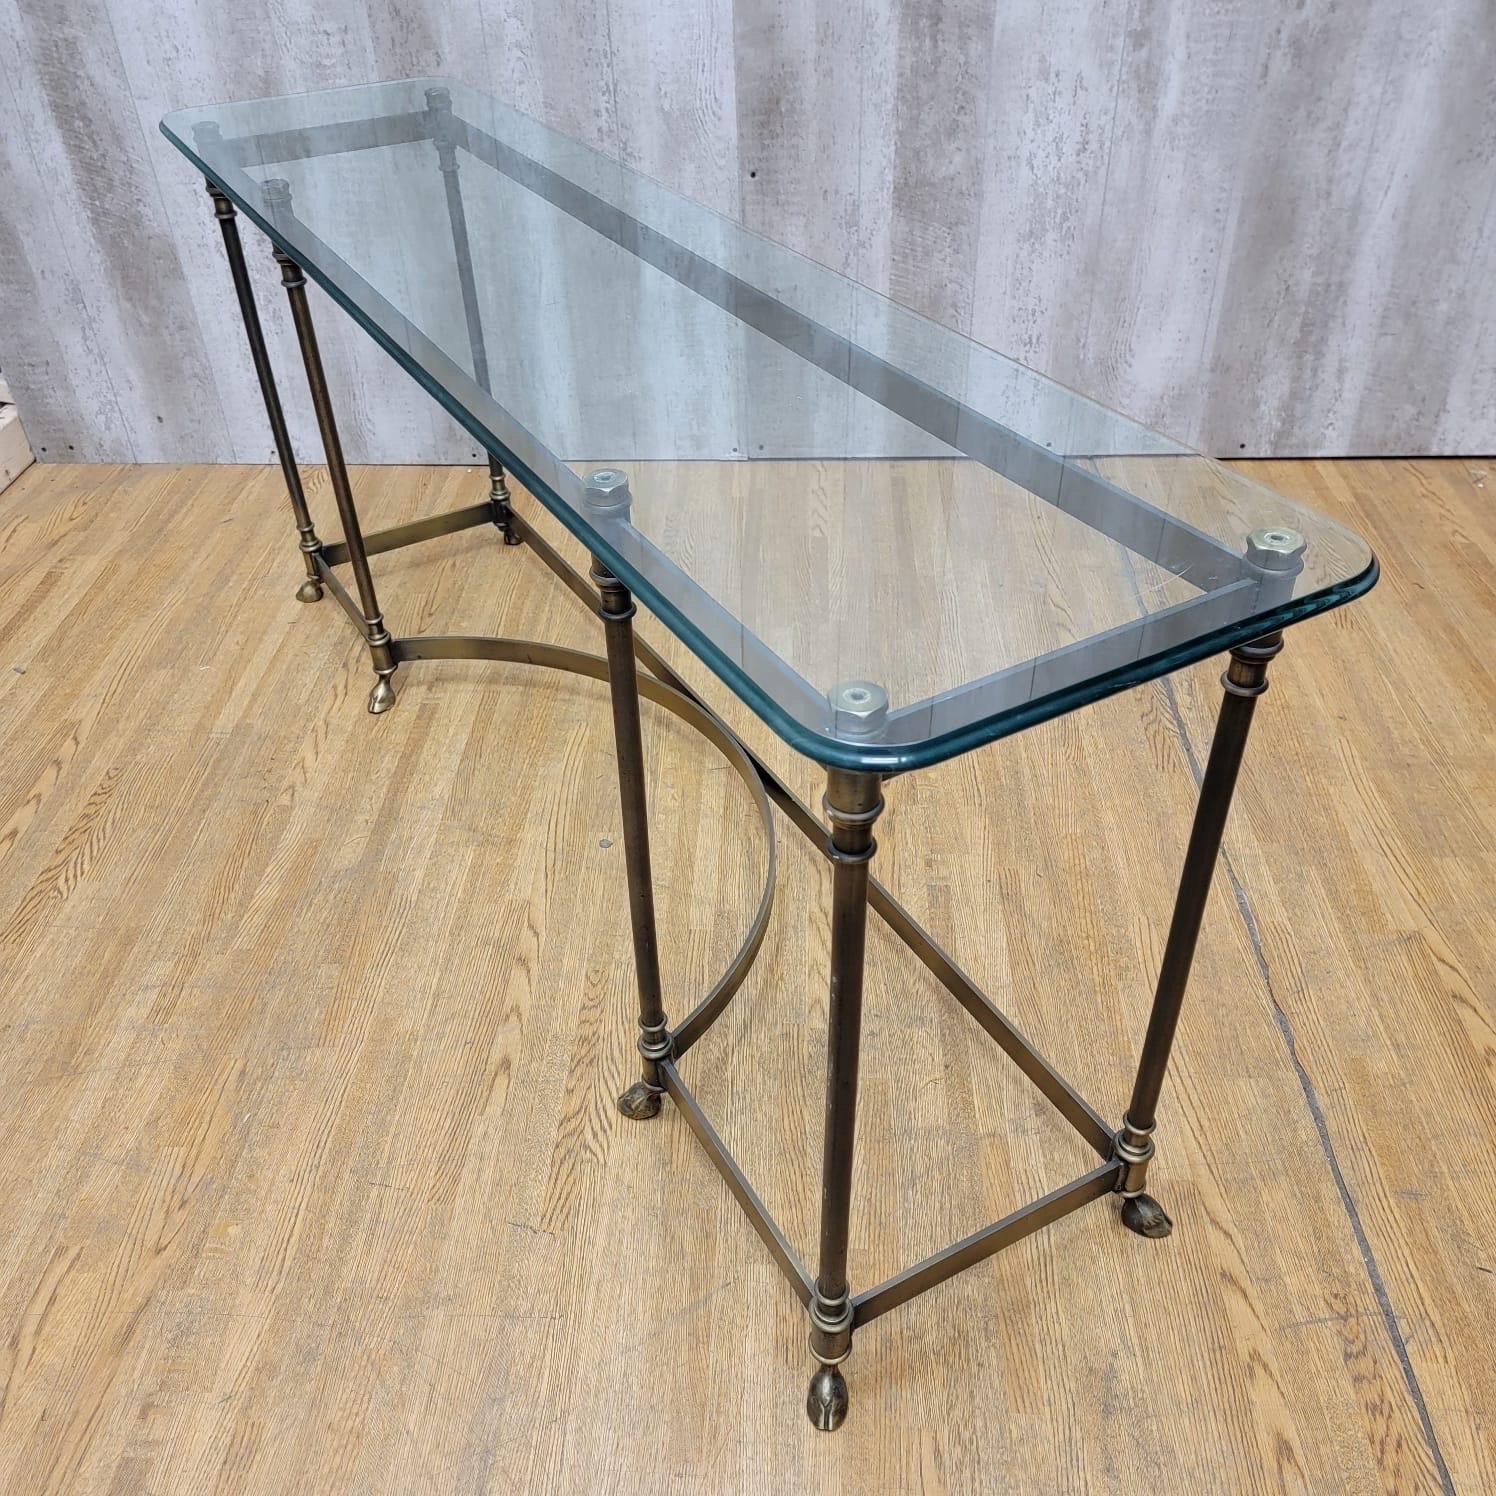 Hollywood Regency Vintage Maison Jansen LaBarge Styled Brass Hoofed Feet Glass Top Console Table For Sale